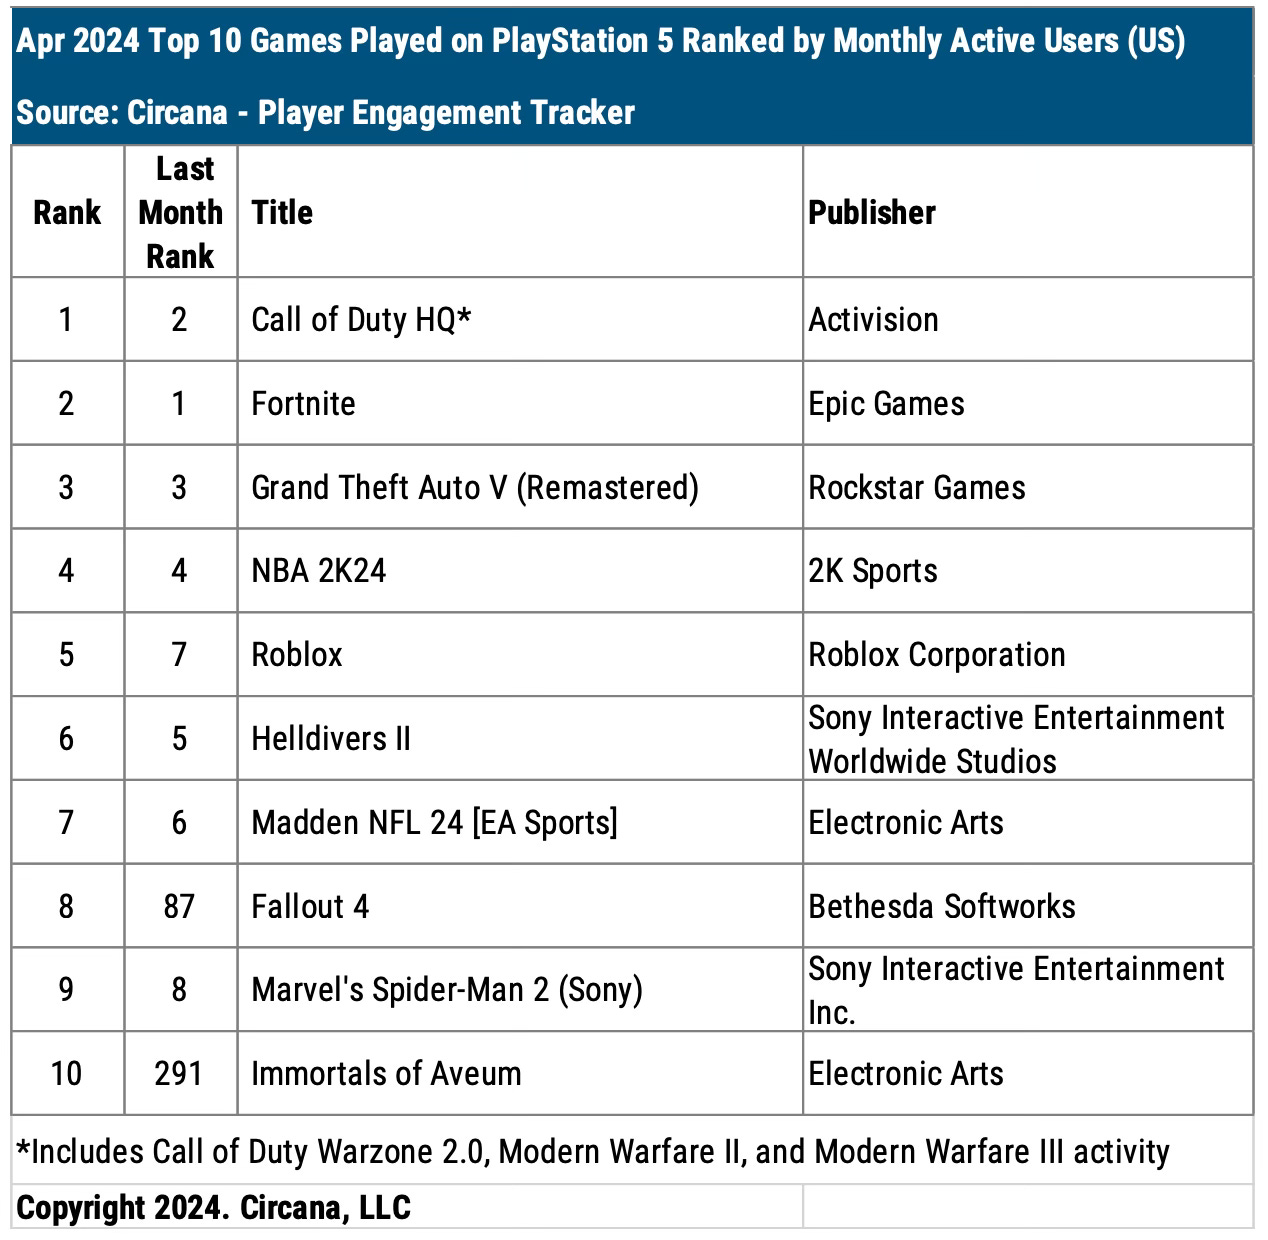 Chart showing the top 10 most-played games on PlayStation 5 in April 2024 ranked by monthly active users in the U.S.